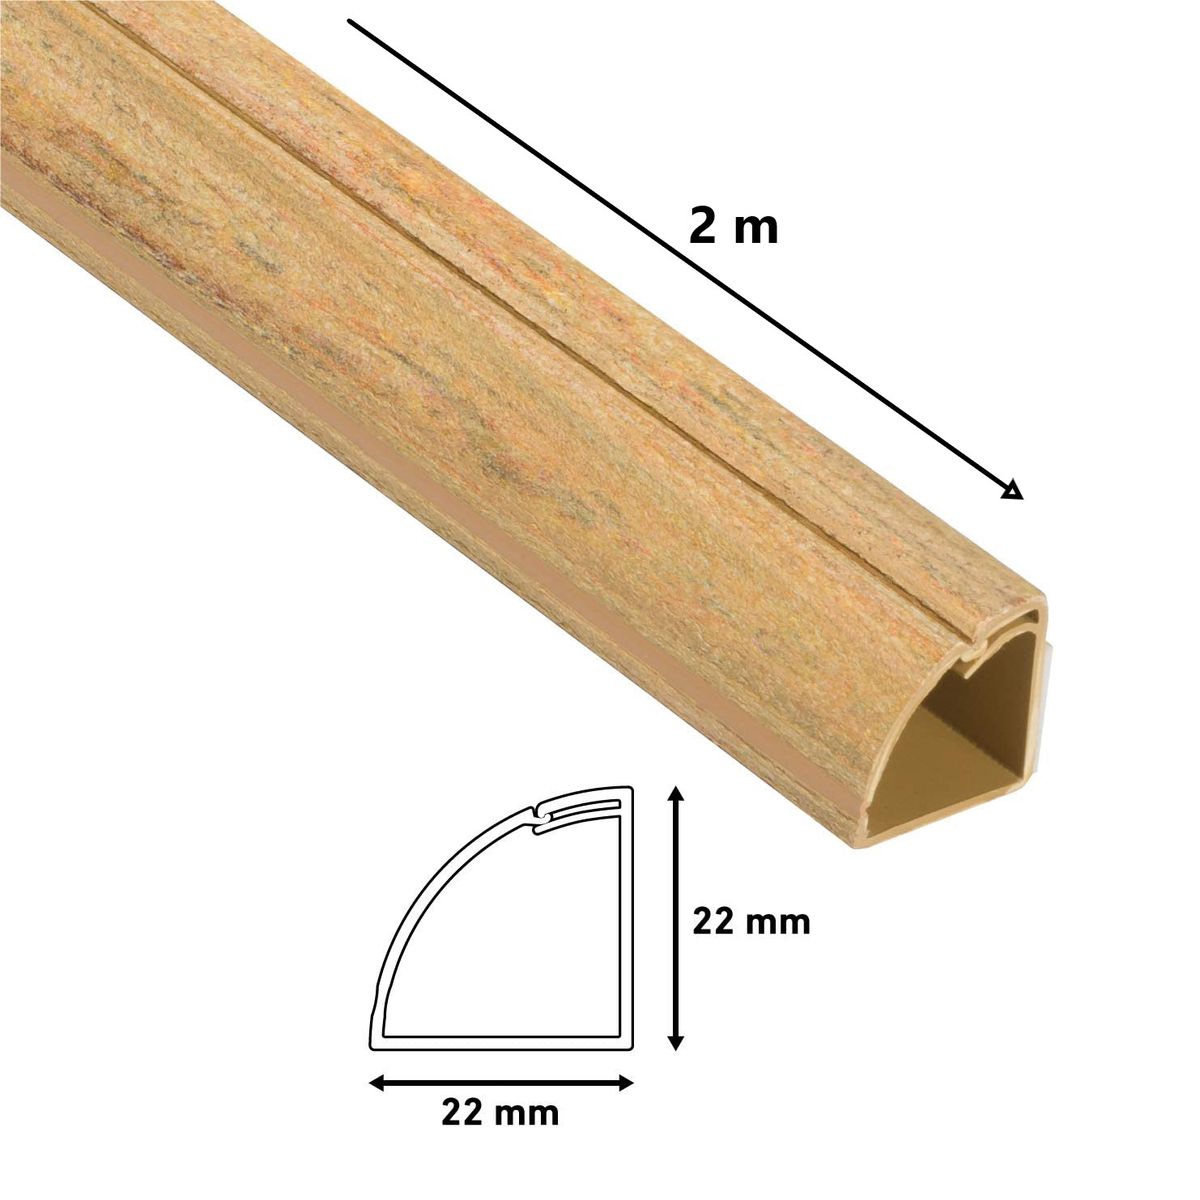 D-Line: ¼ Round Cable Management Trunking 22mm x 22mm x 2m Oak Finnish